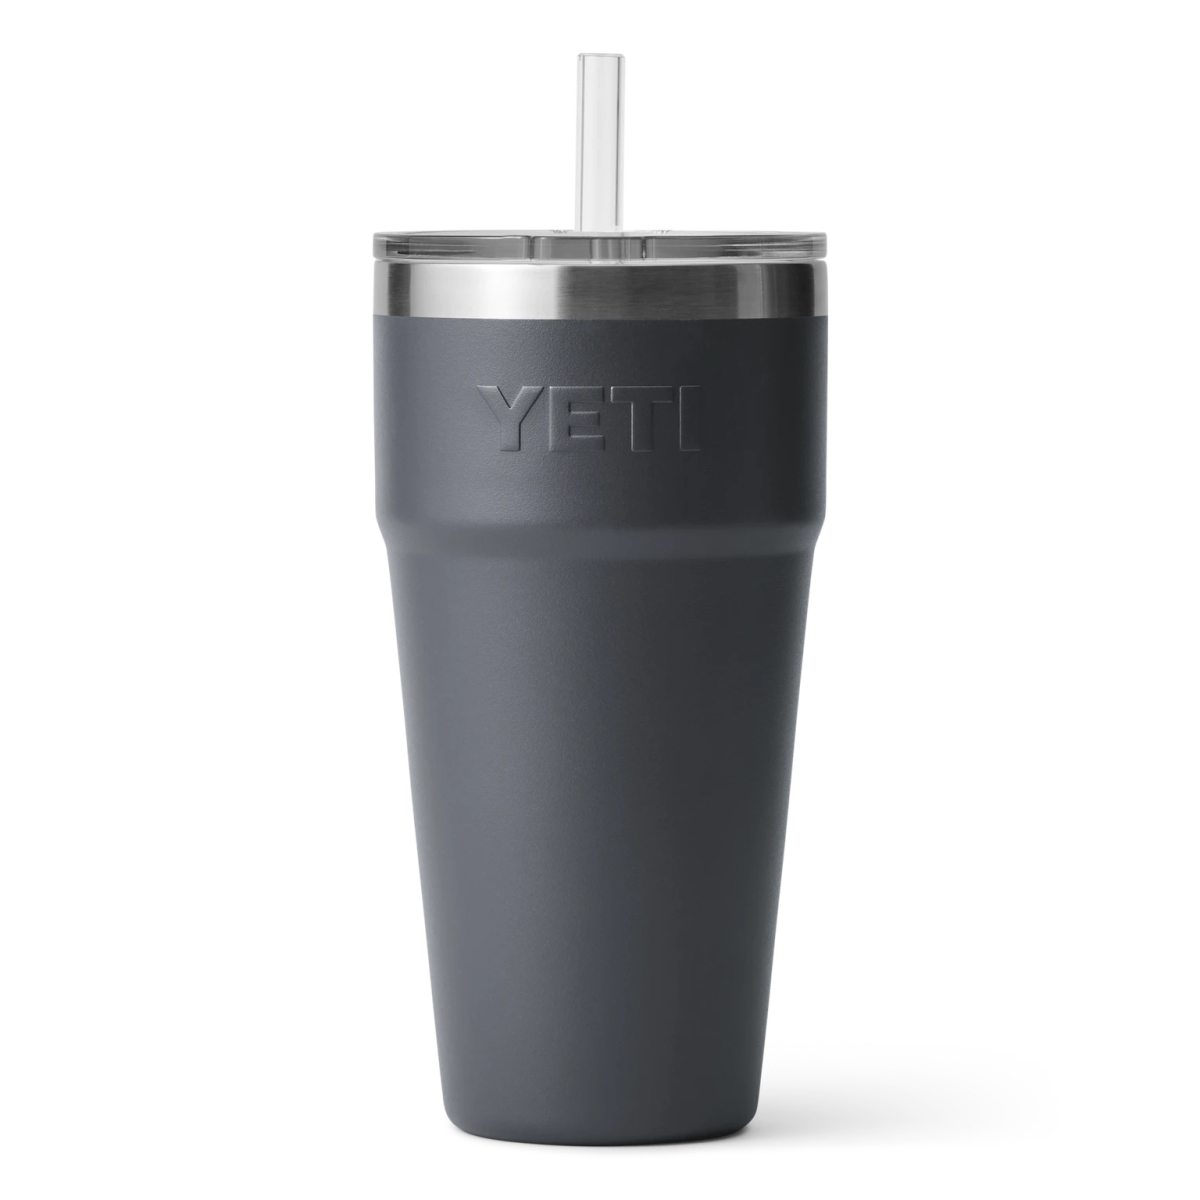 https://www.berings.com/wp-content/uploads/2023/02/Yeti-Rambler-26oz-Stackable-Cup-with-Straw-Lid-Charcoal2.jpg